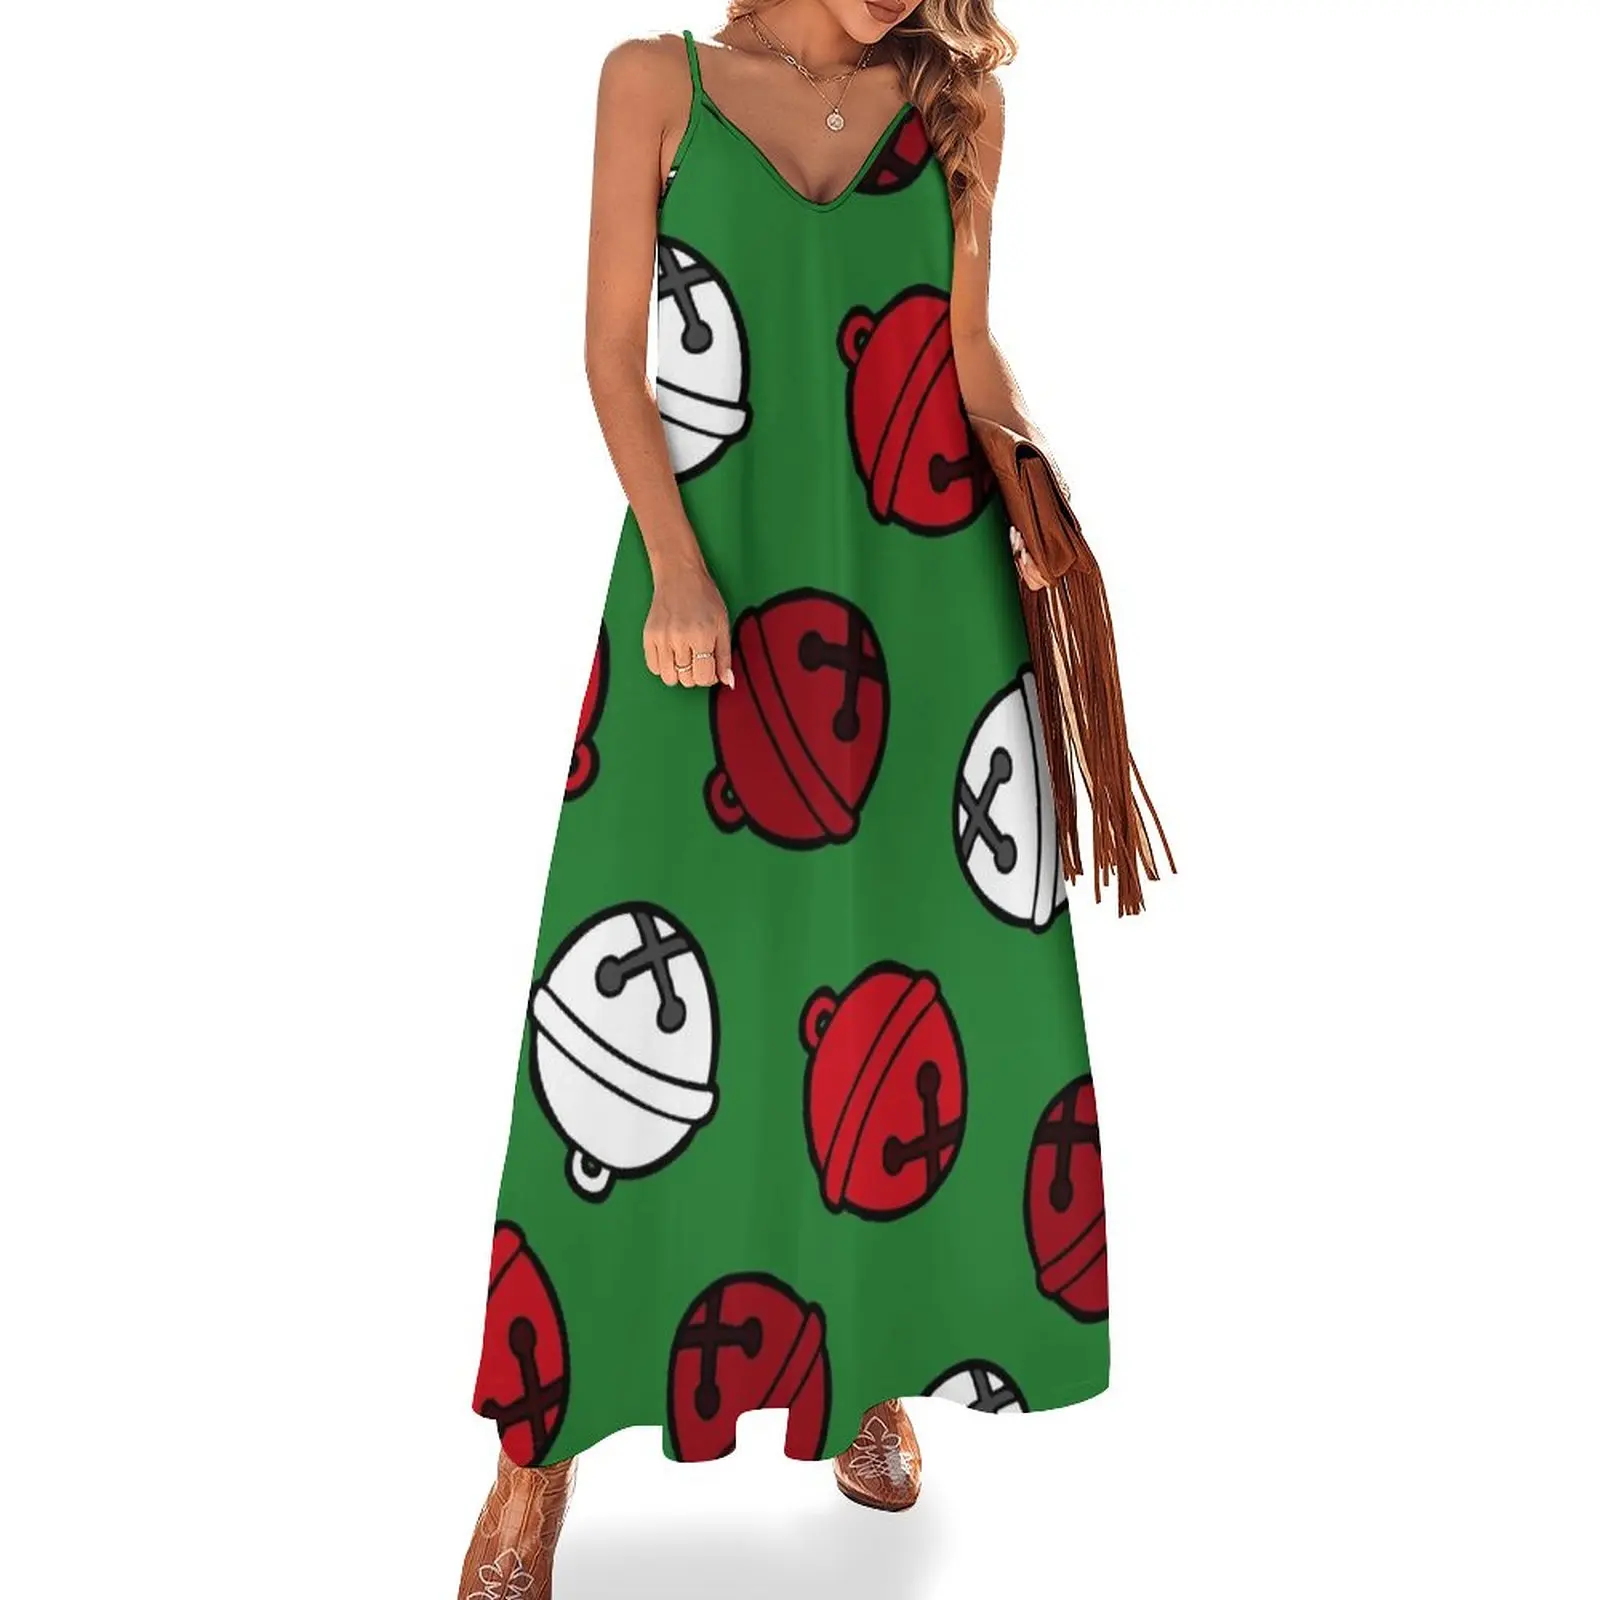 

Jingle Bells Christmas Pattern in Red, White and Green Sleeveless Dress evening dresses ladies dress for women